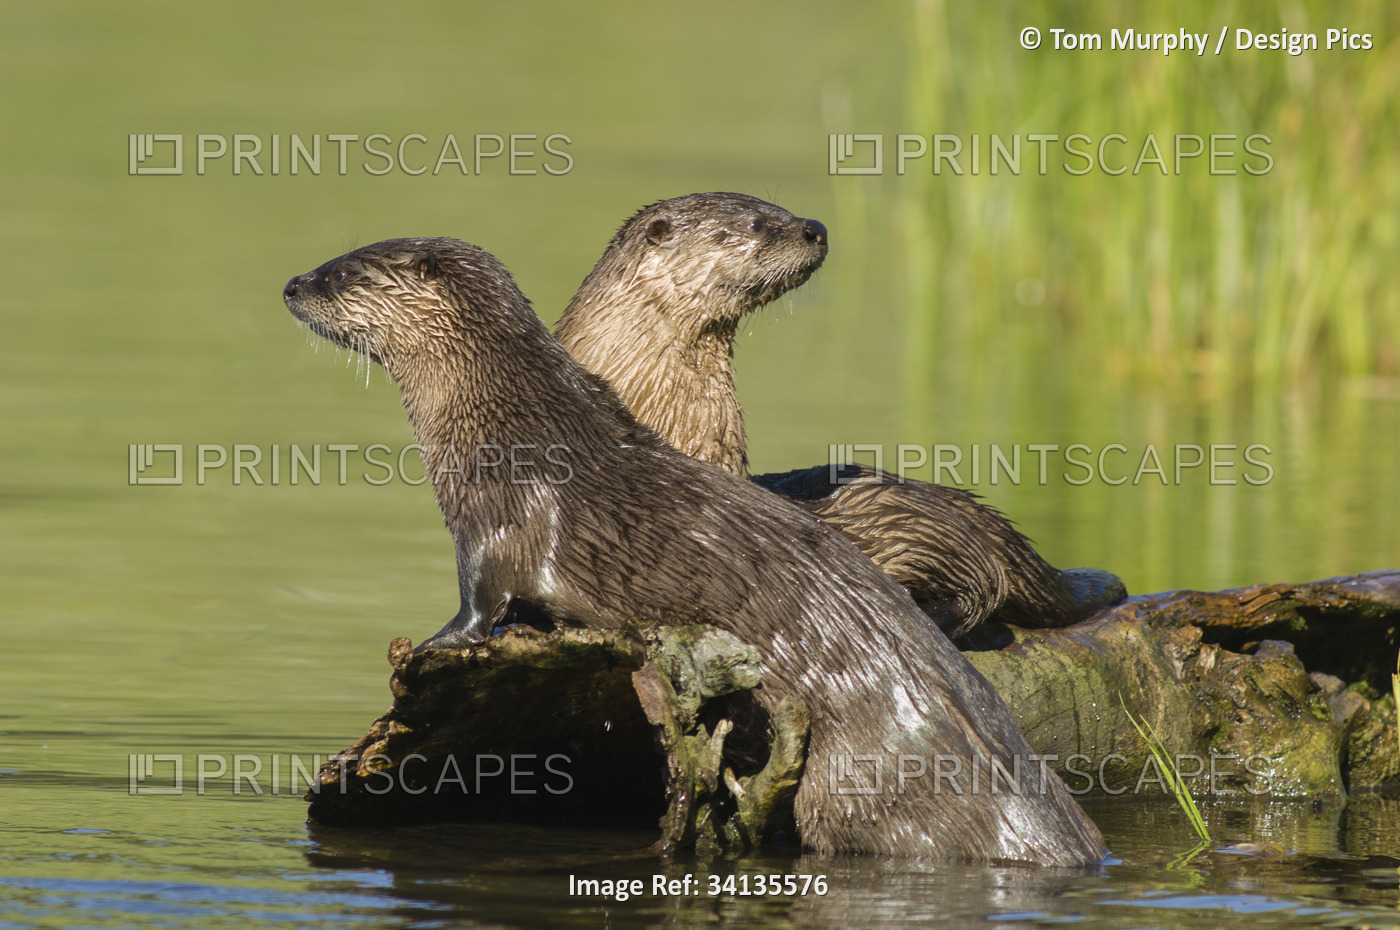 Two Northern river otters (Lutra canadensis) enjoying a warm summer day in ...